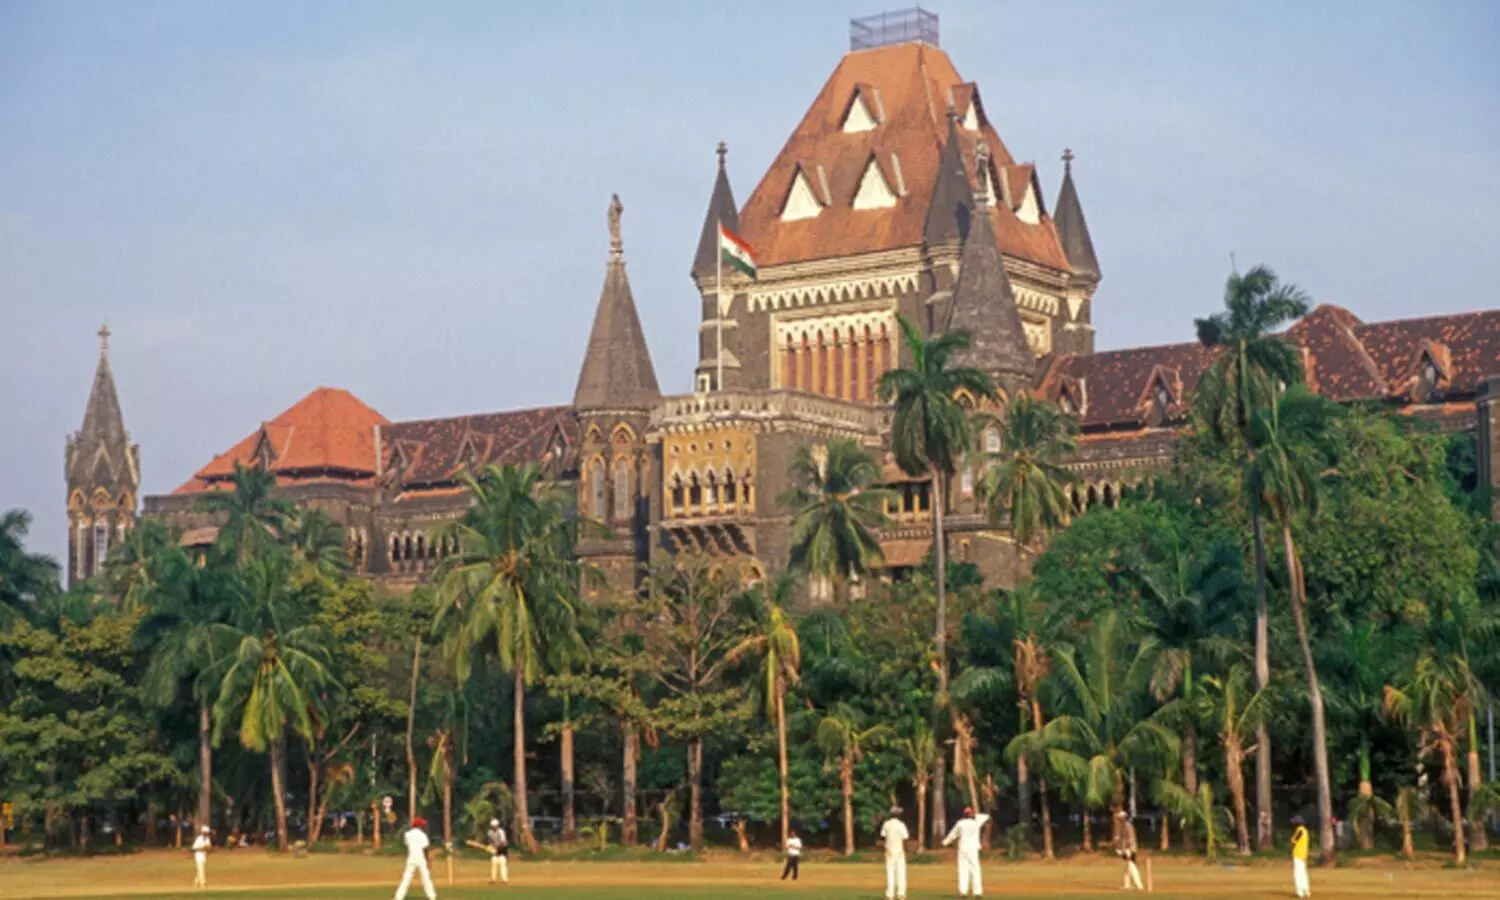 No Stay on FMGE June 2021: Bombay HC asks NMC to submit affidavit on legality of test